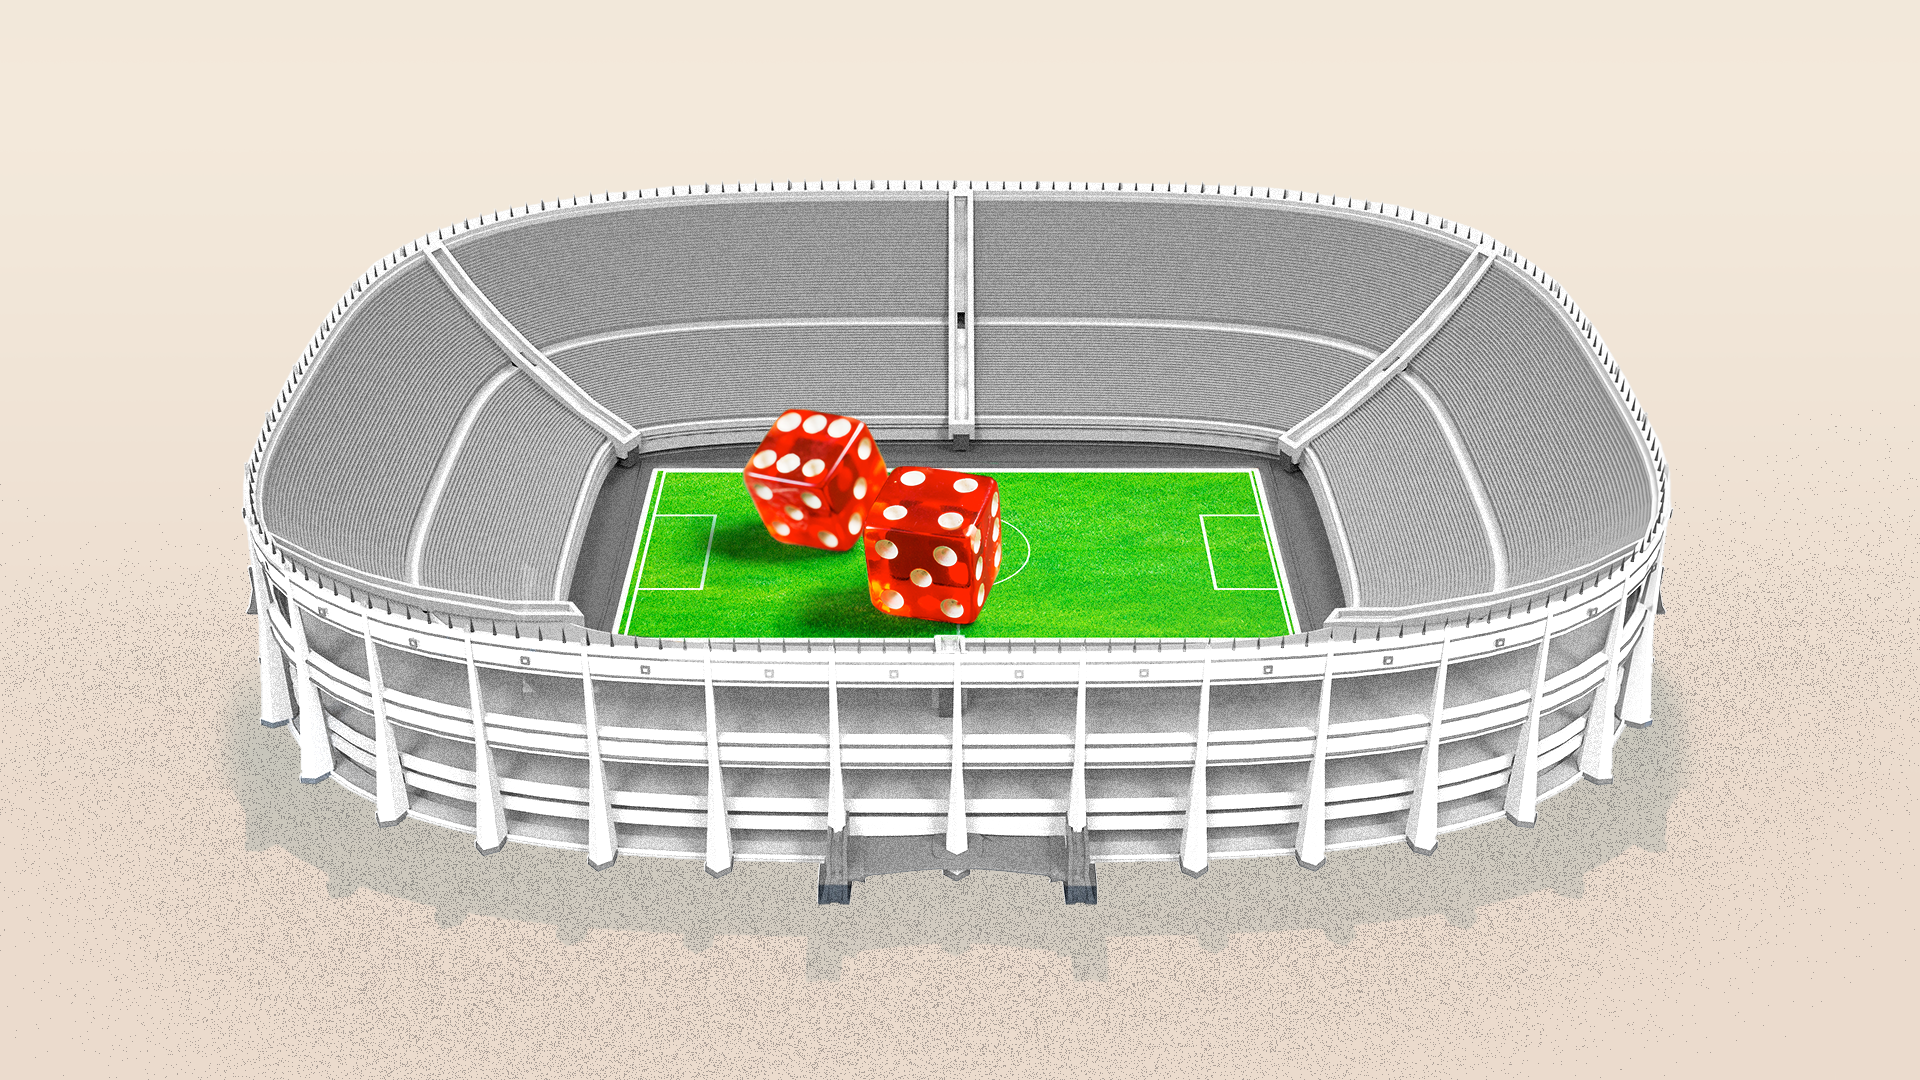 Illustration of dice being rolled within a stadium